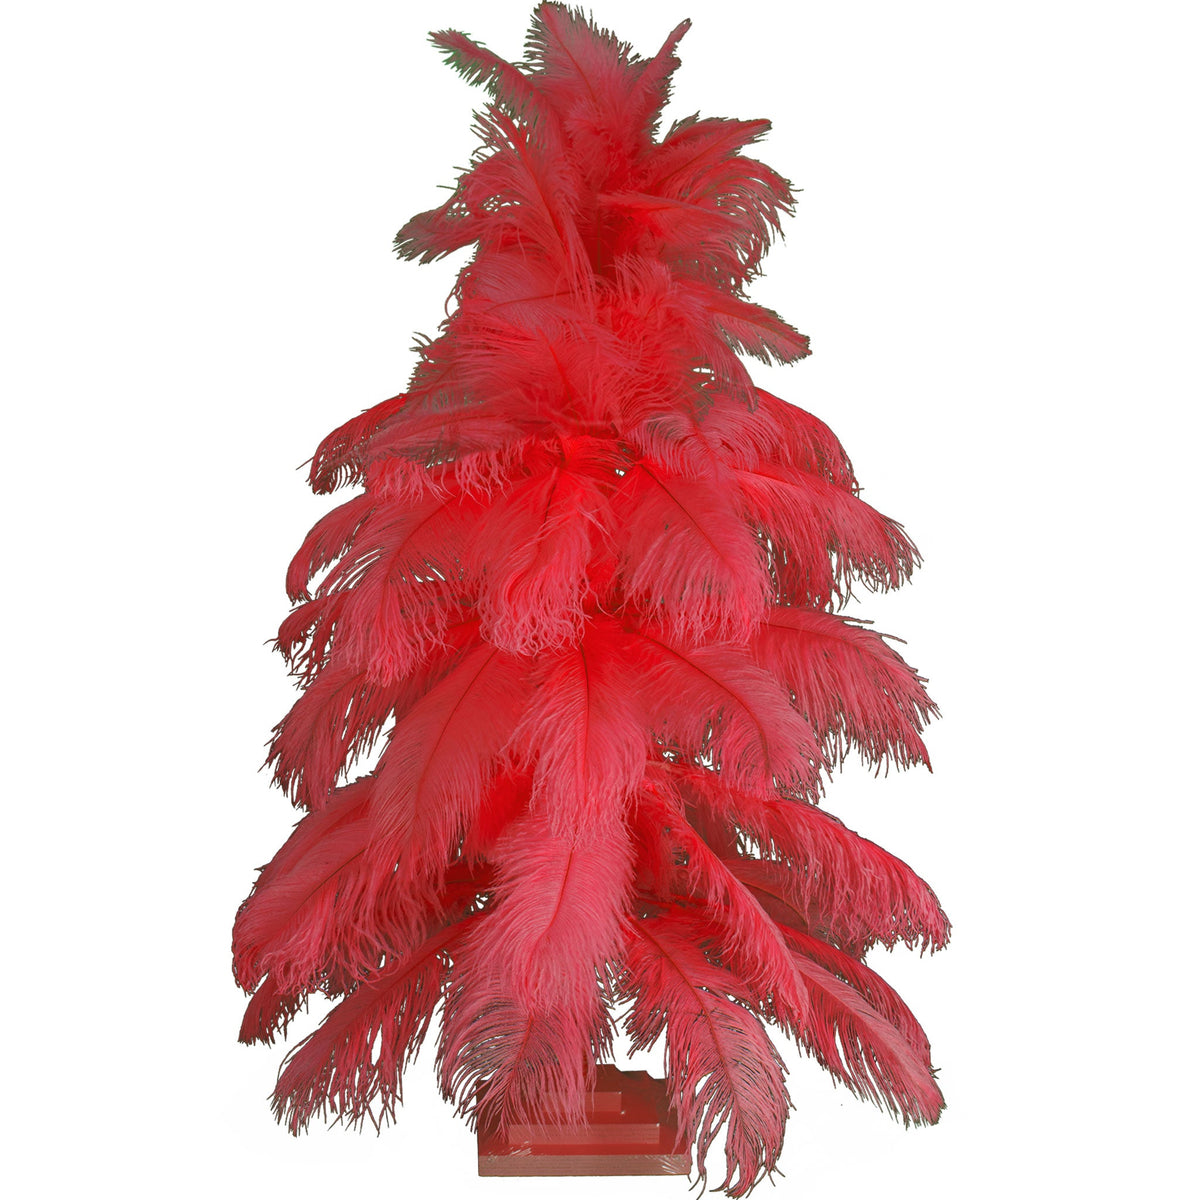 Introducing Lee Display's brand new 3ft tall Red Ostrich Feather Christmas Trees! Made with real ostrich feathers